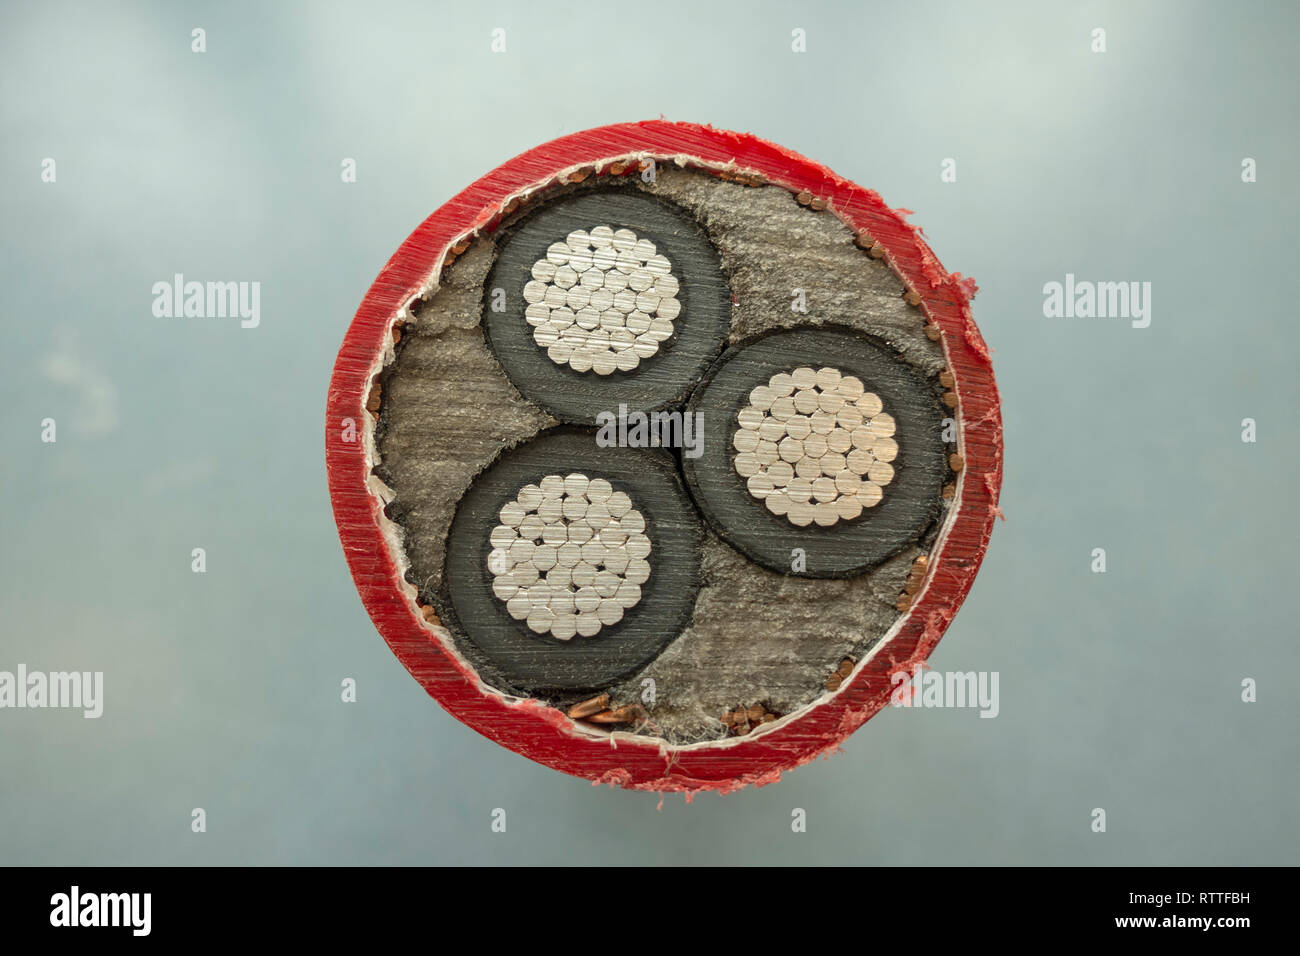 Cross section of an XLPE medium voltage power cable as used in the UK power distribution network in the UK. Stock Photo